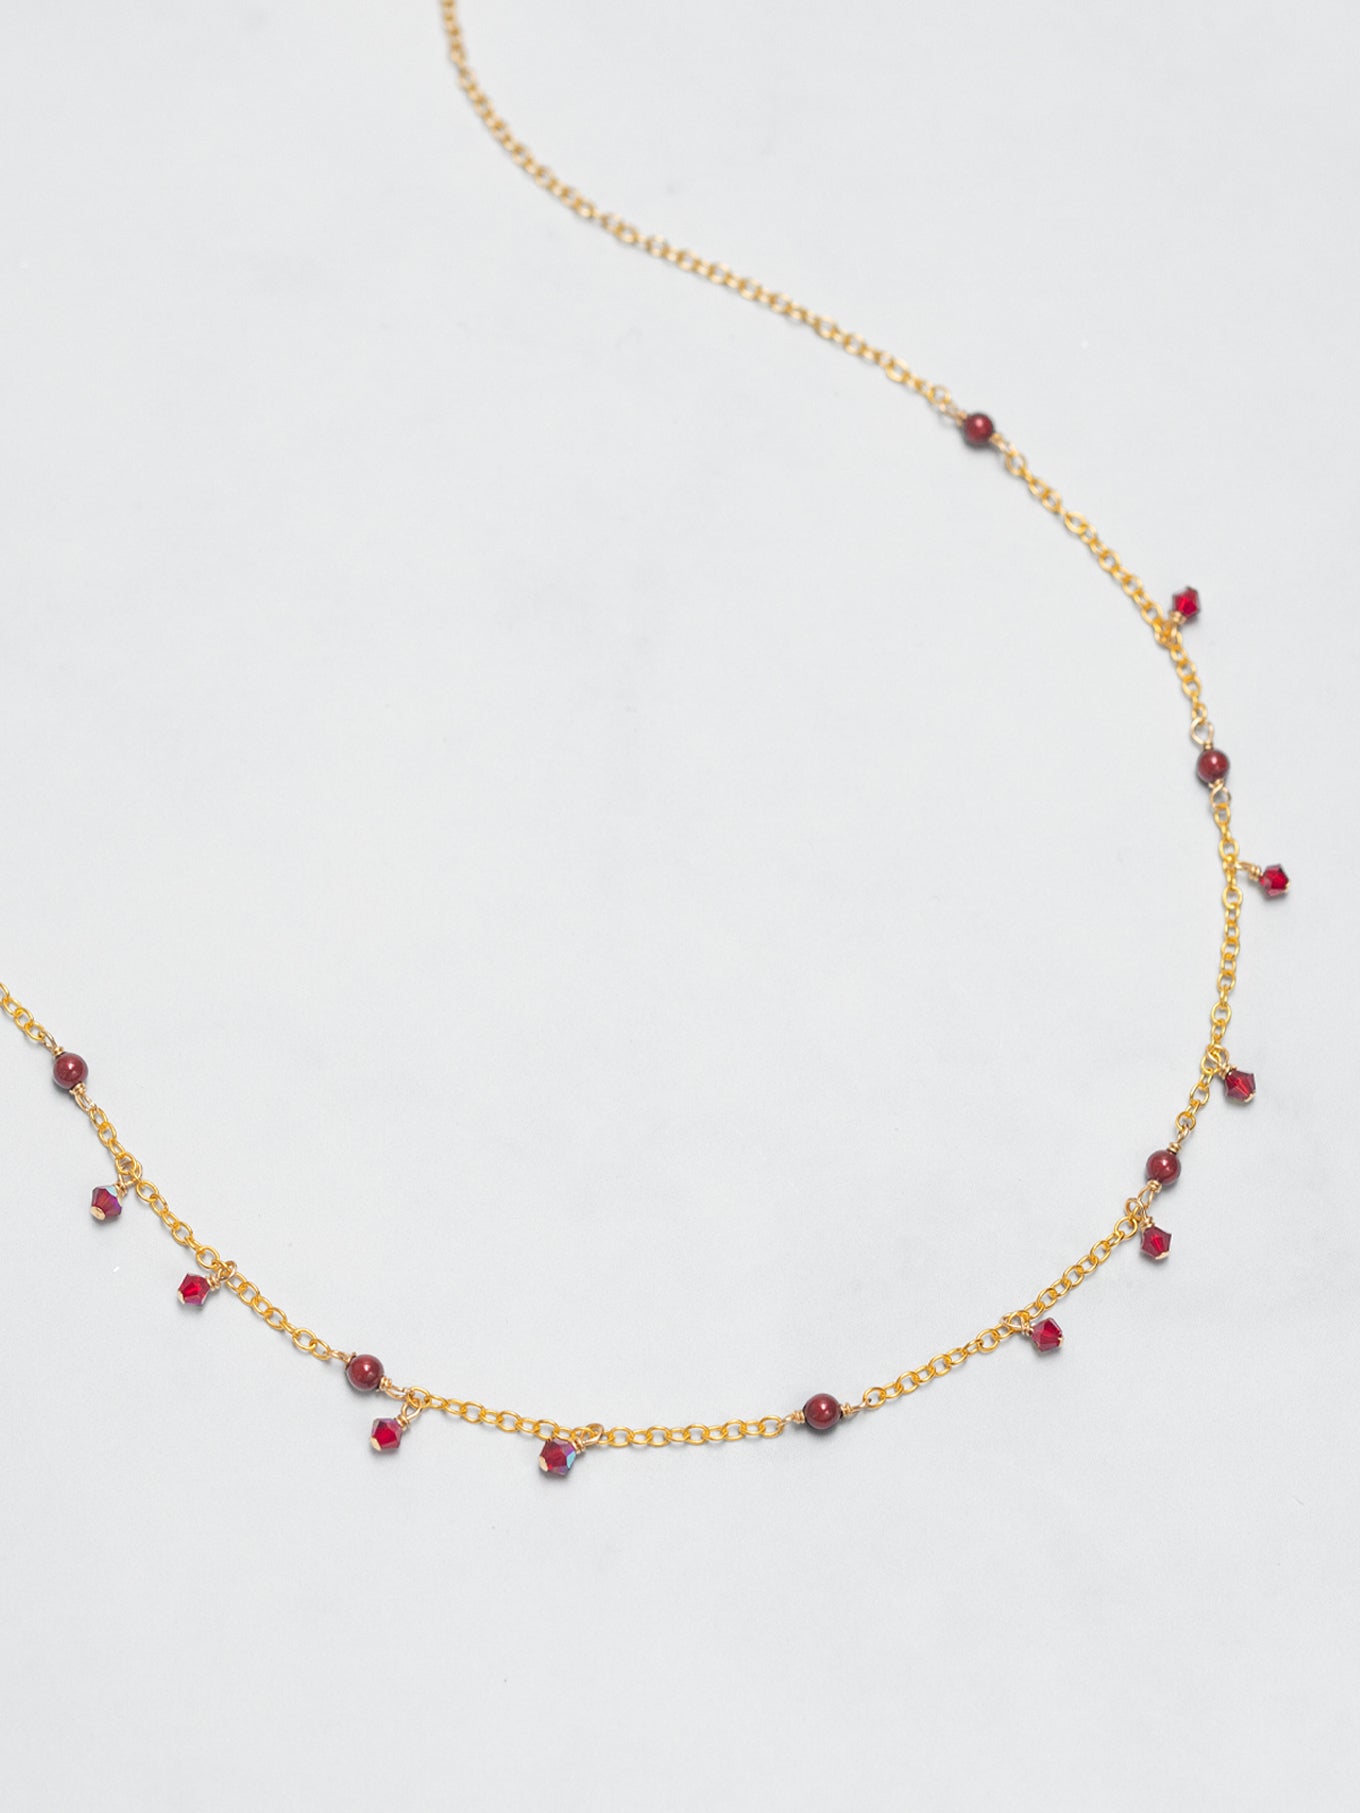 For elegance lovers or brides, the Cora Necklace is a statement of posh ...